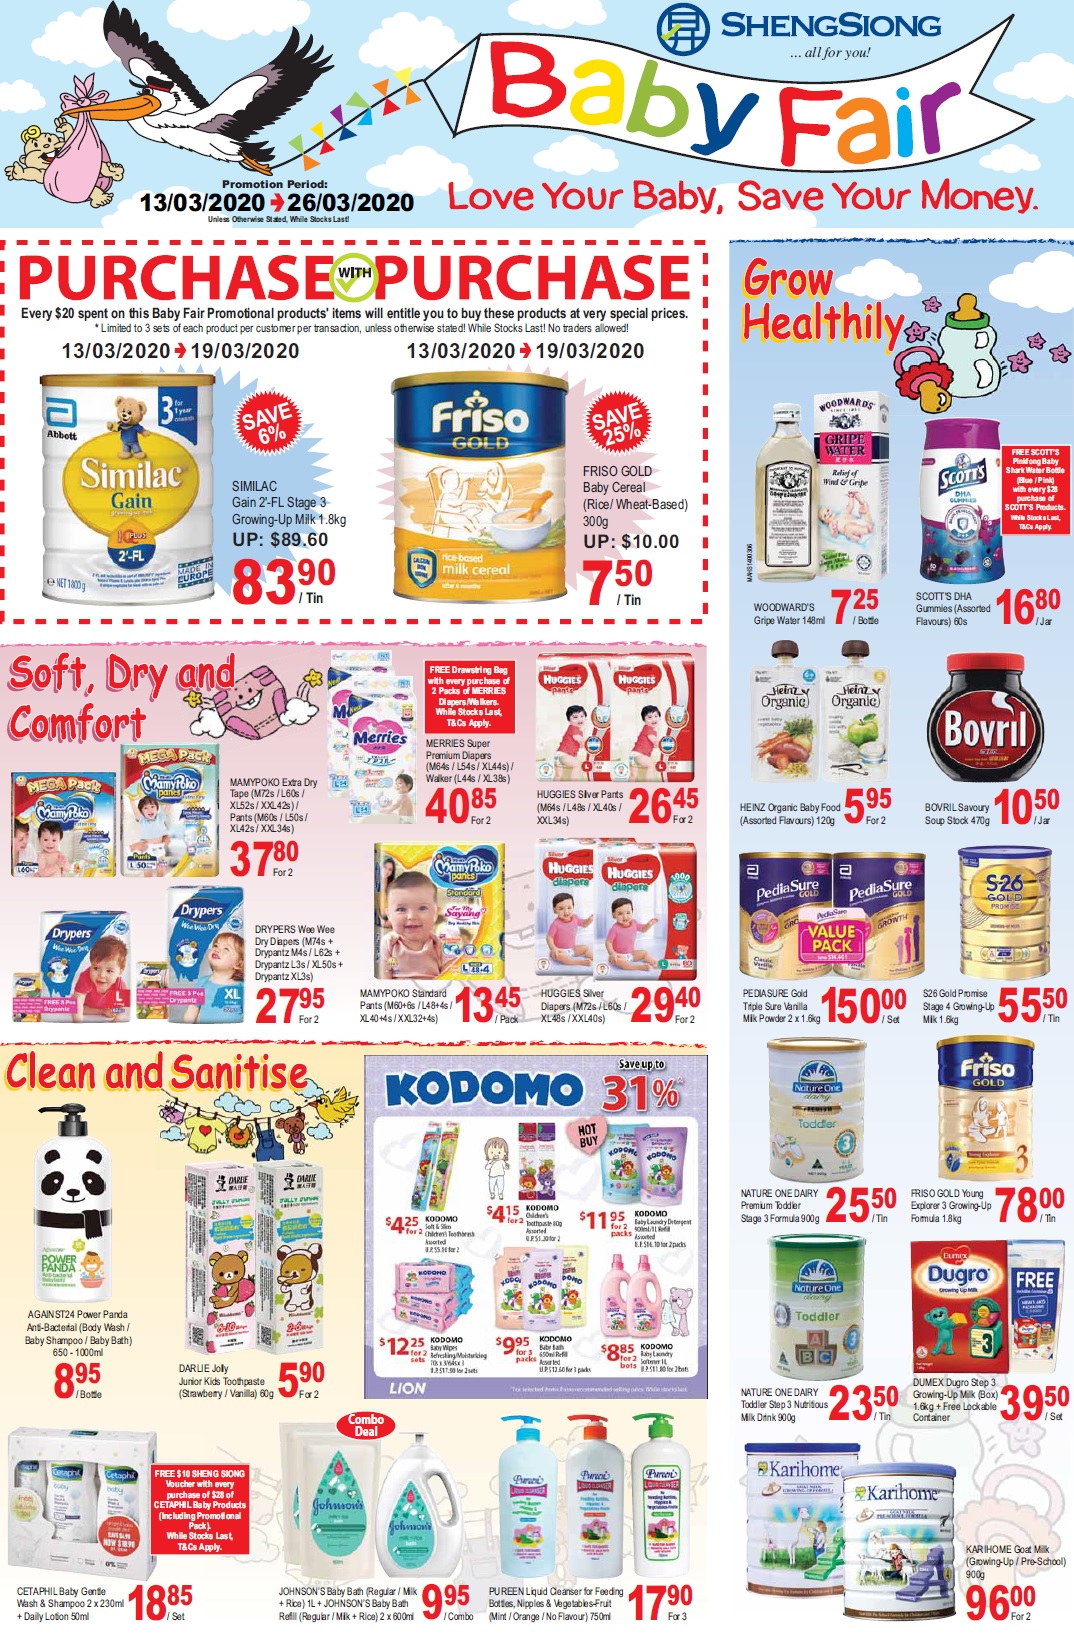 milk, diaper and other baby care products that are under promotion